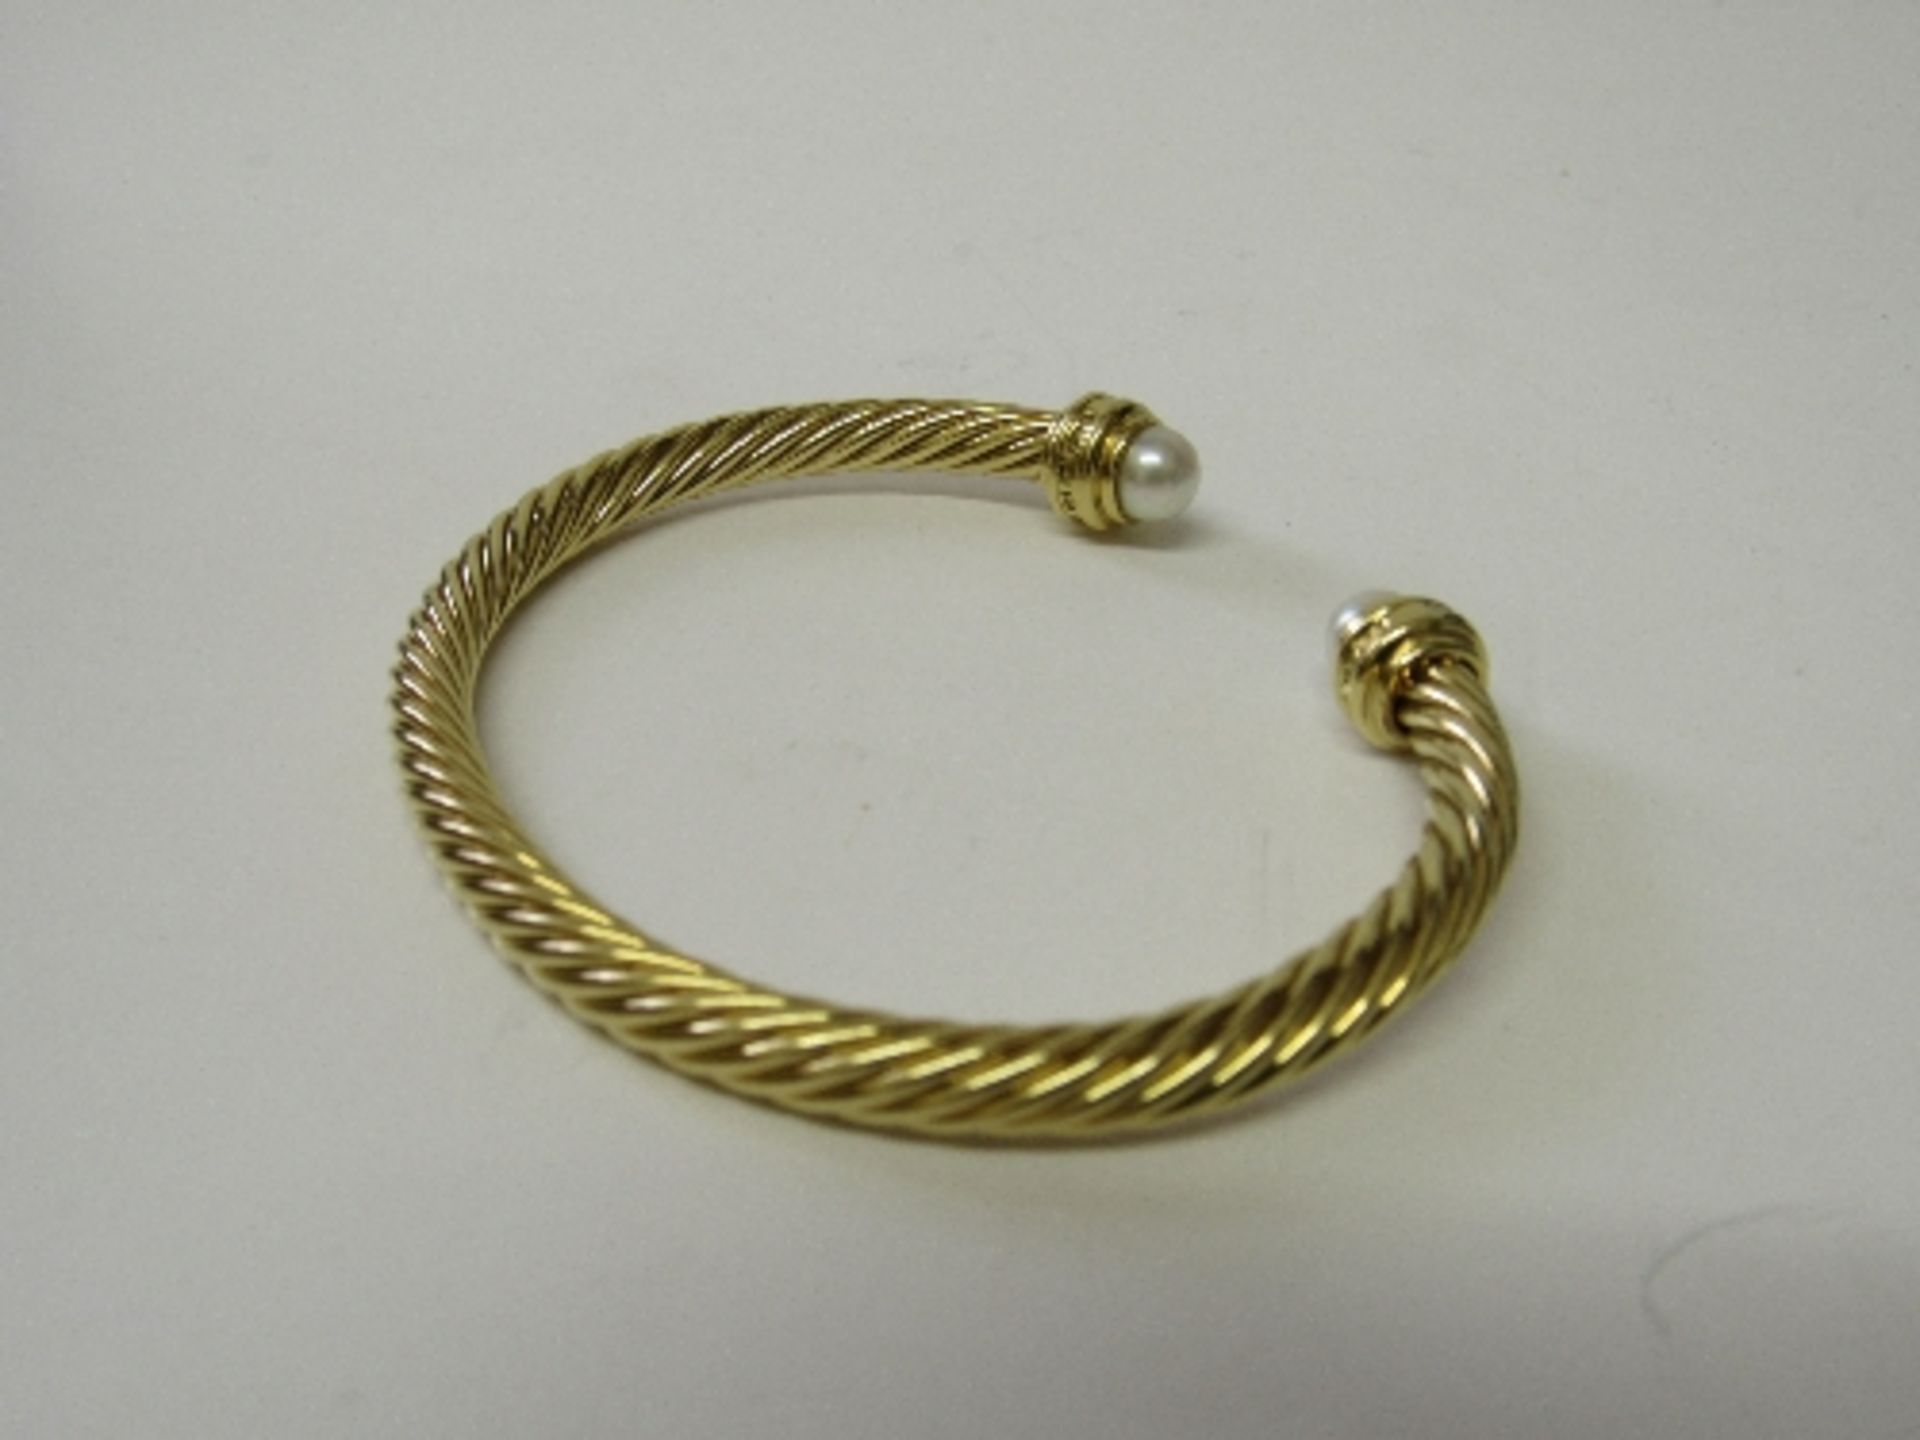 18ct yellow gold David Yurman Cable Classic bracelet with white cultured freshwater pearls & pave - Image 2 of 2